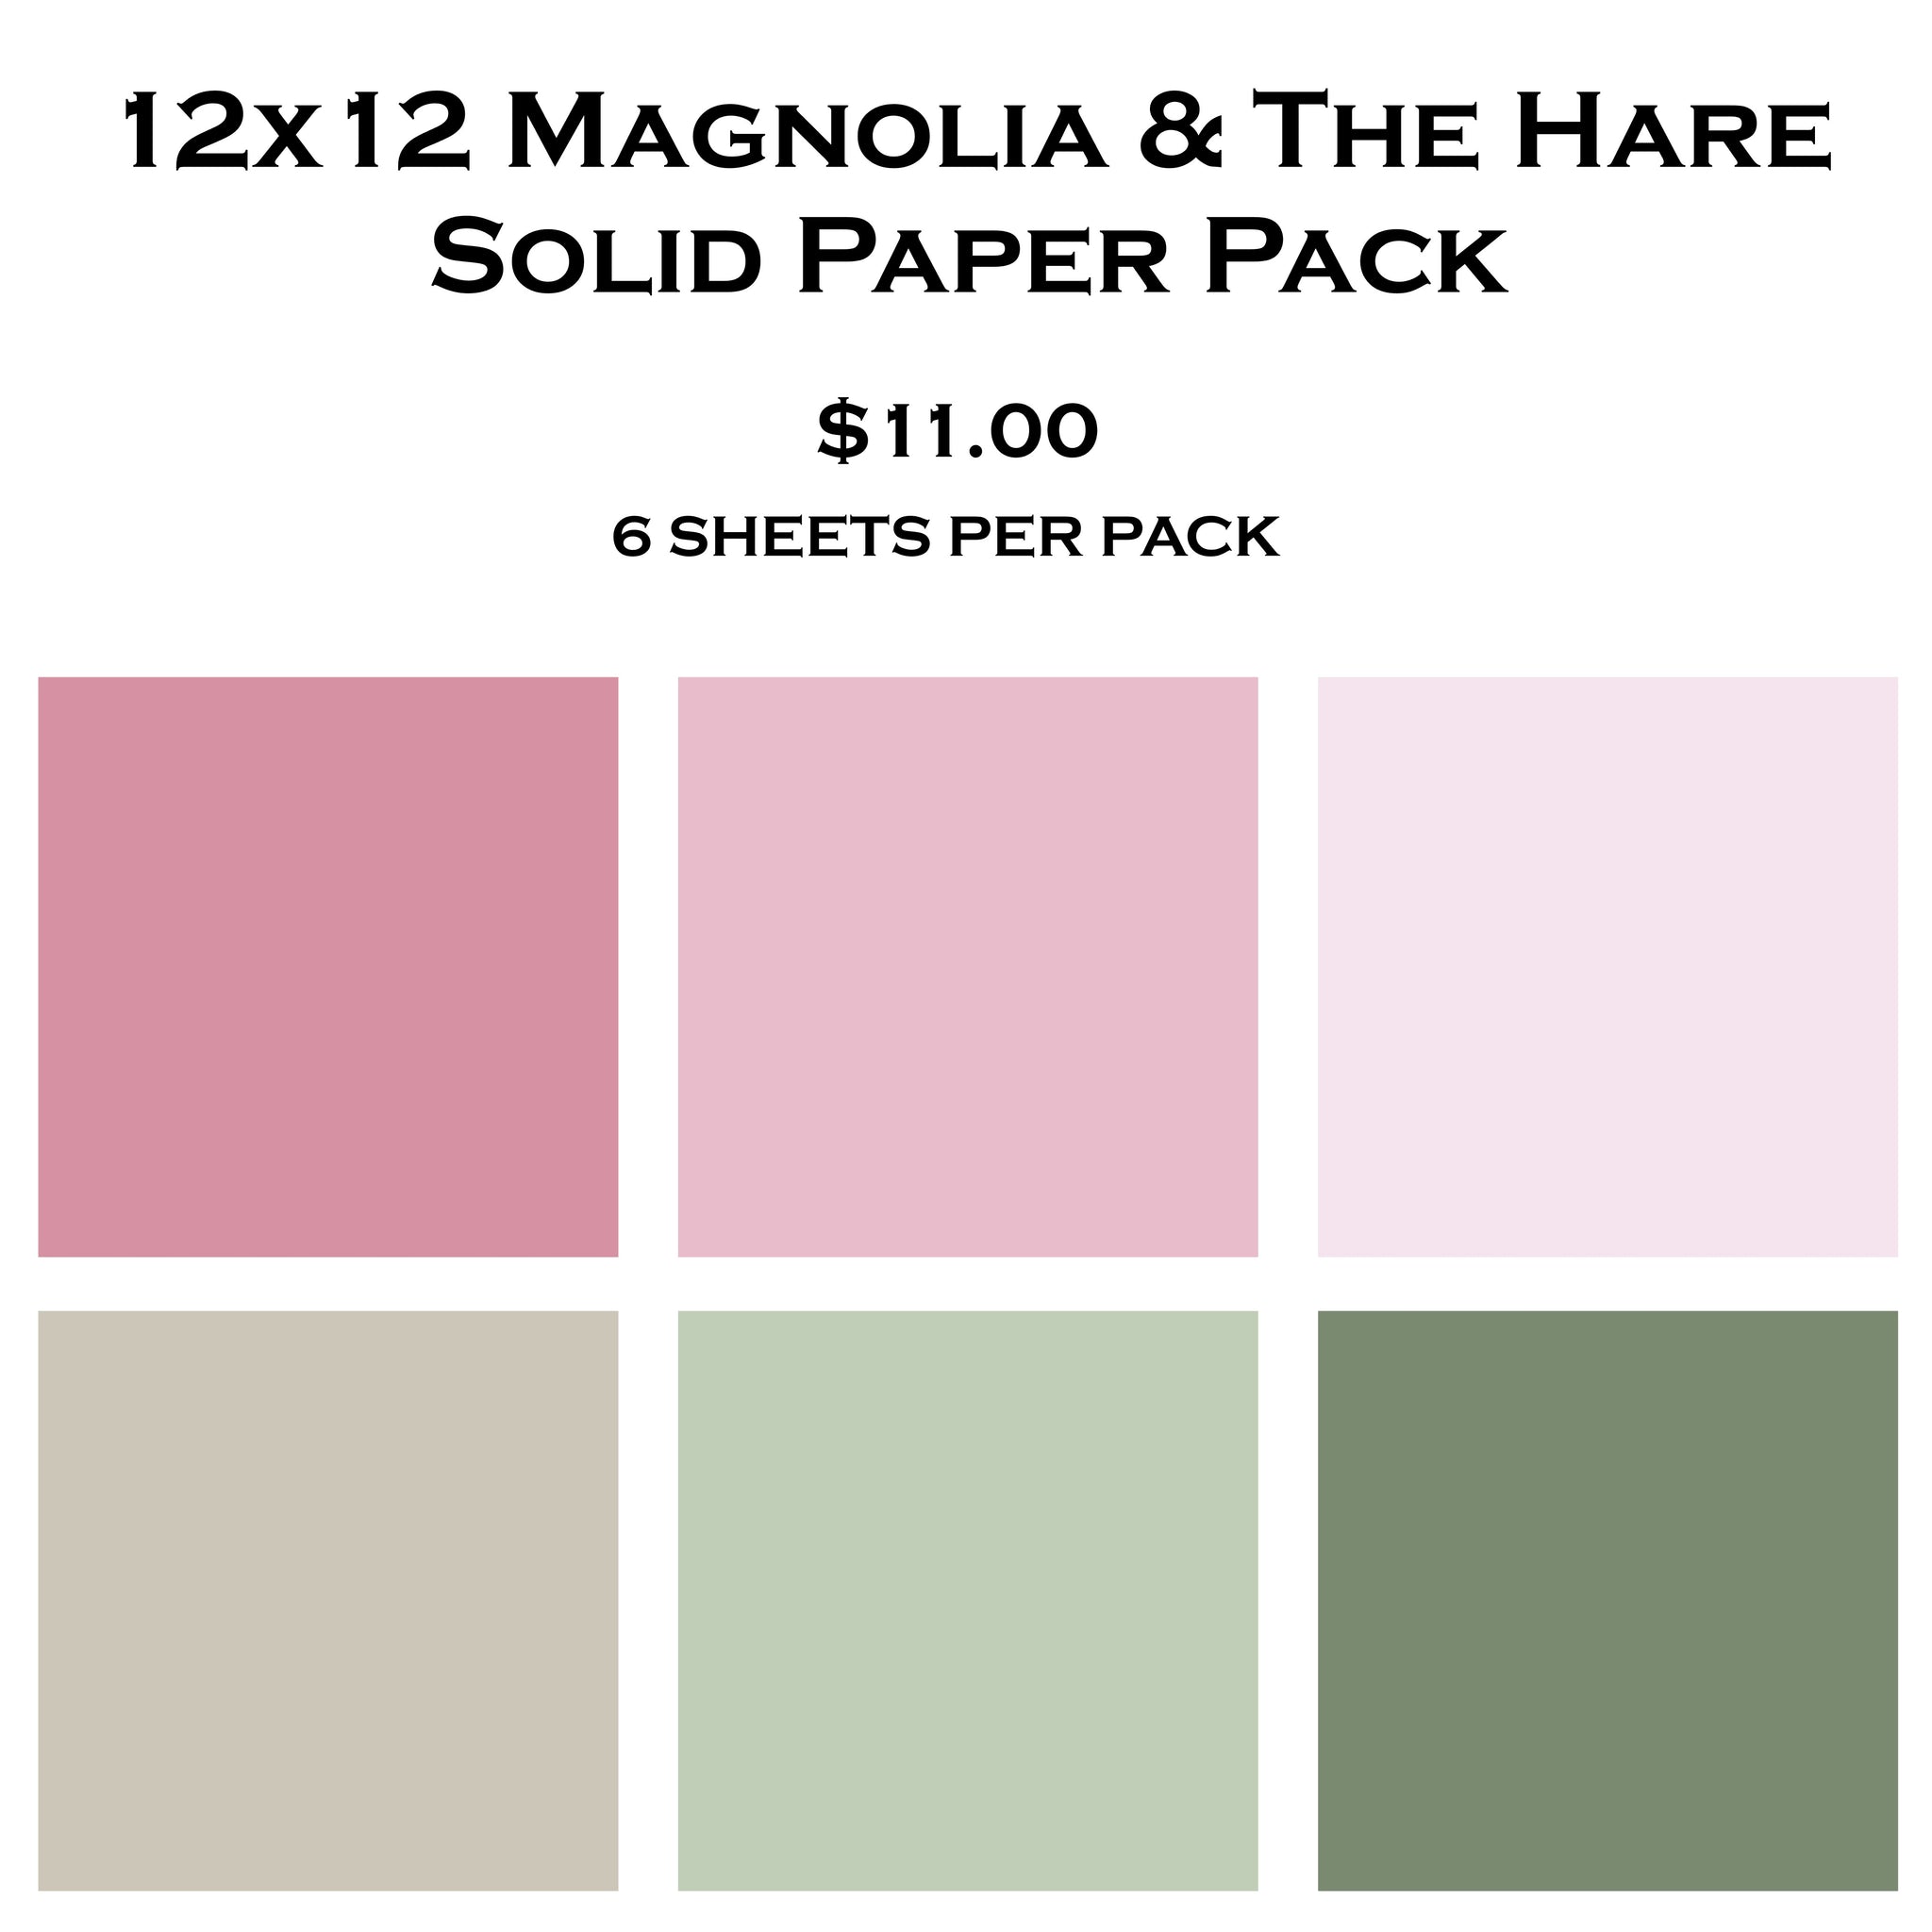 Magnolia & The Hare 12x12 Solid Paper Pack